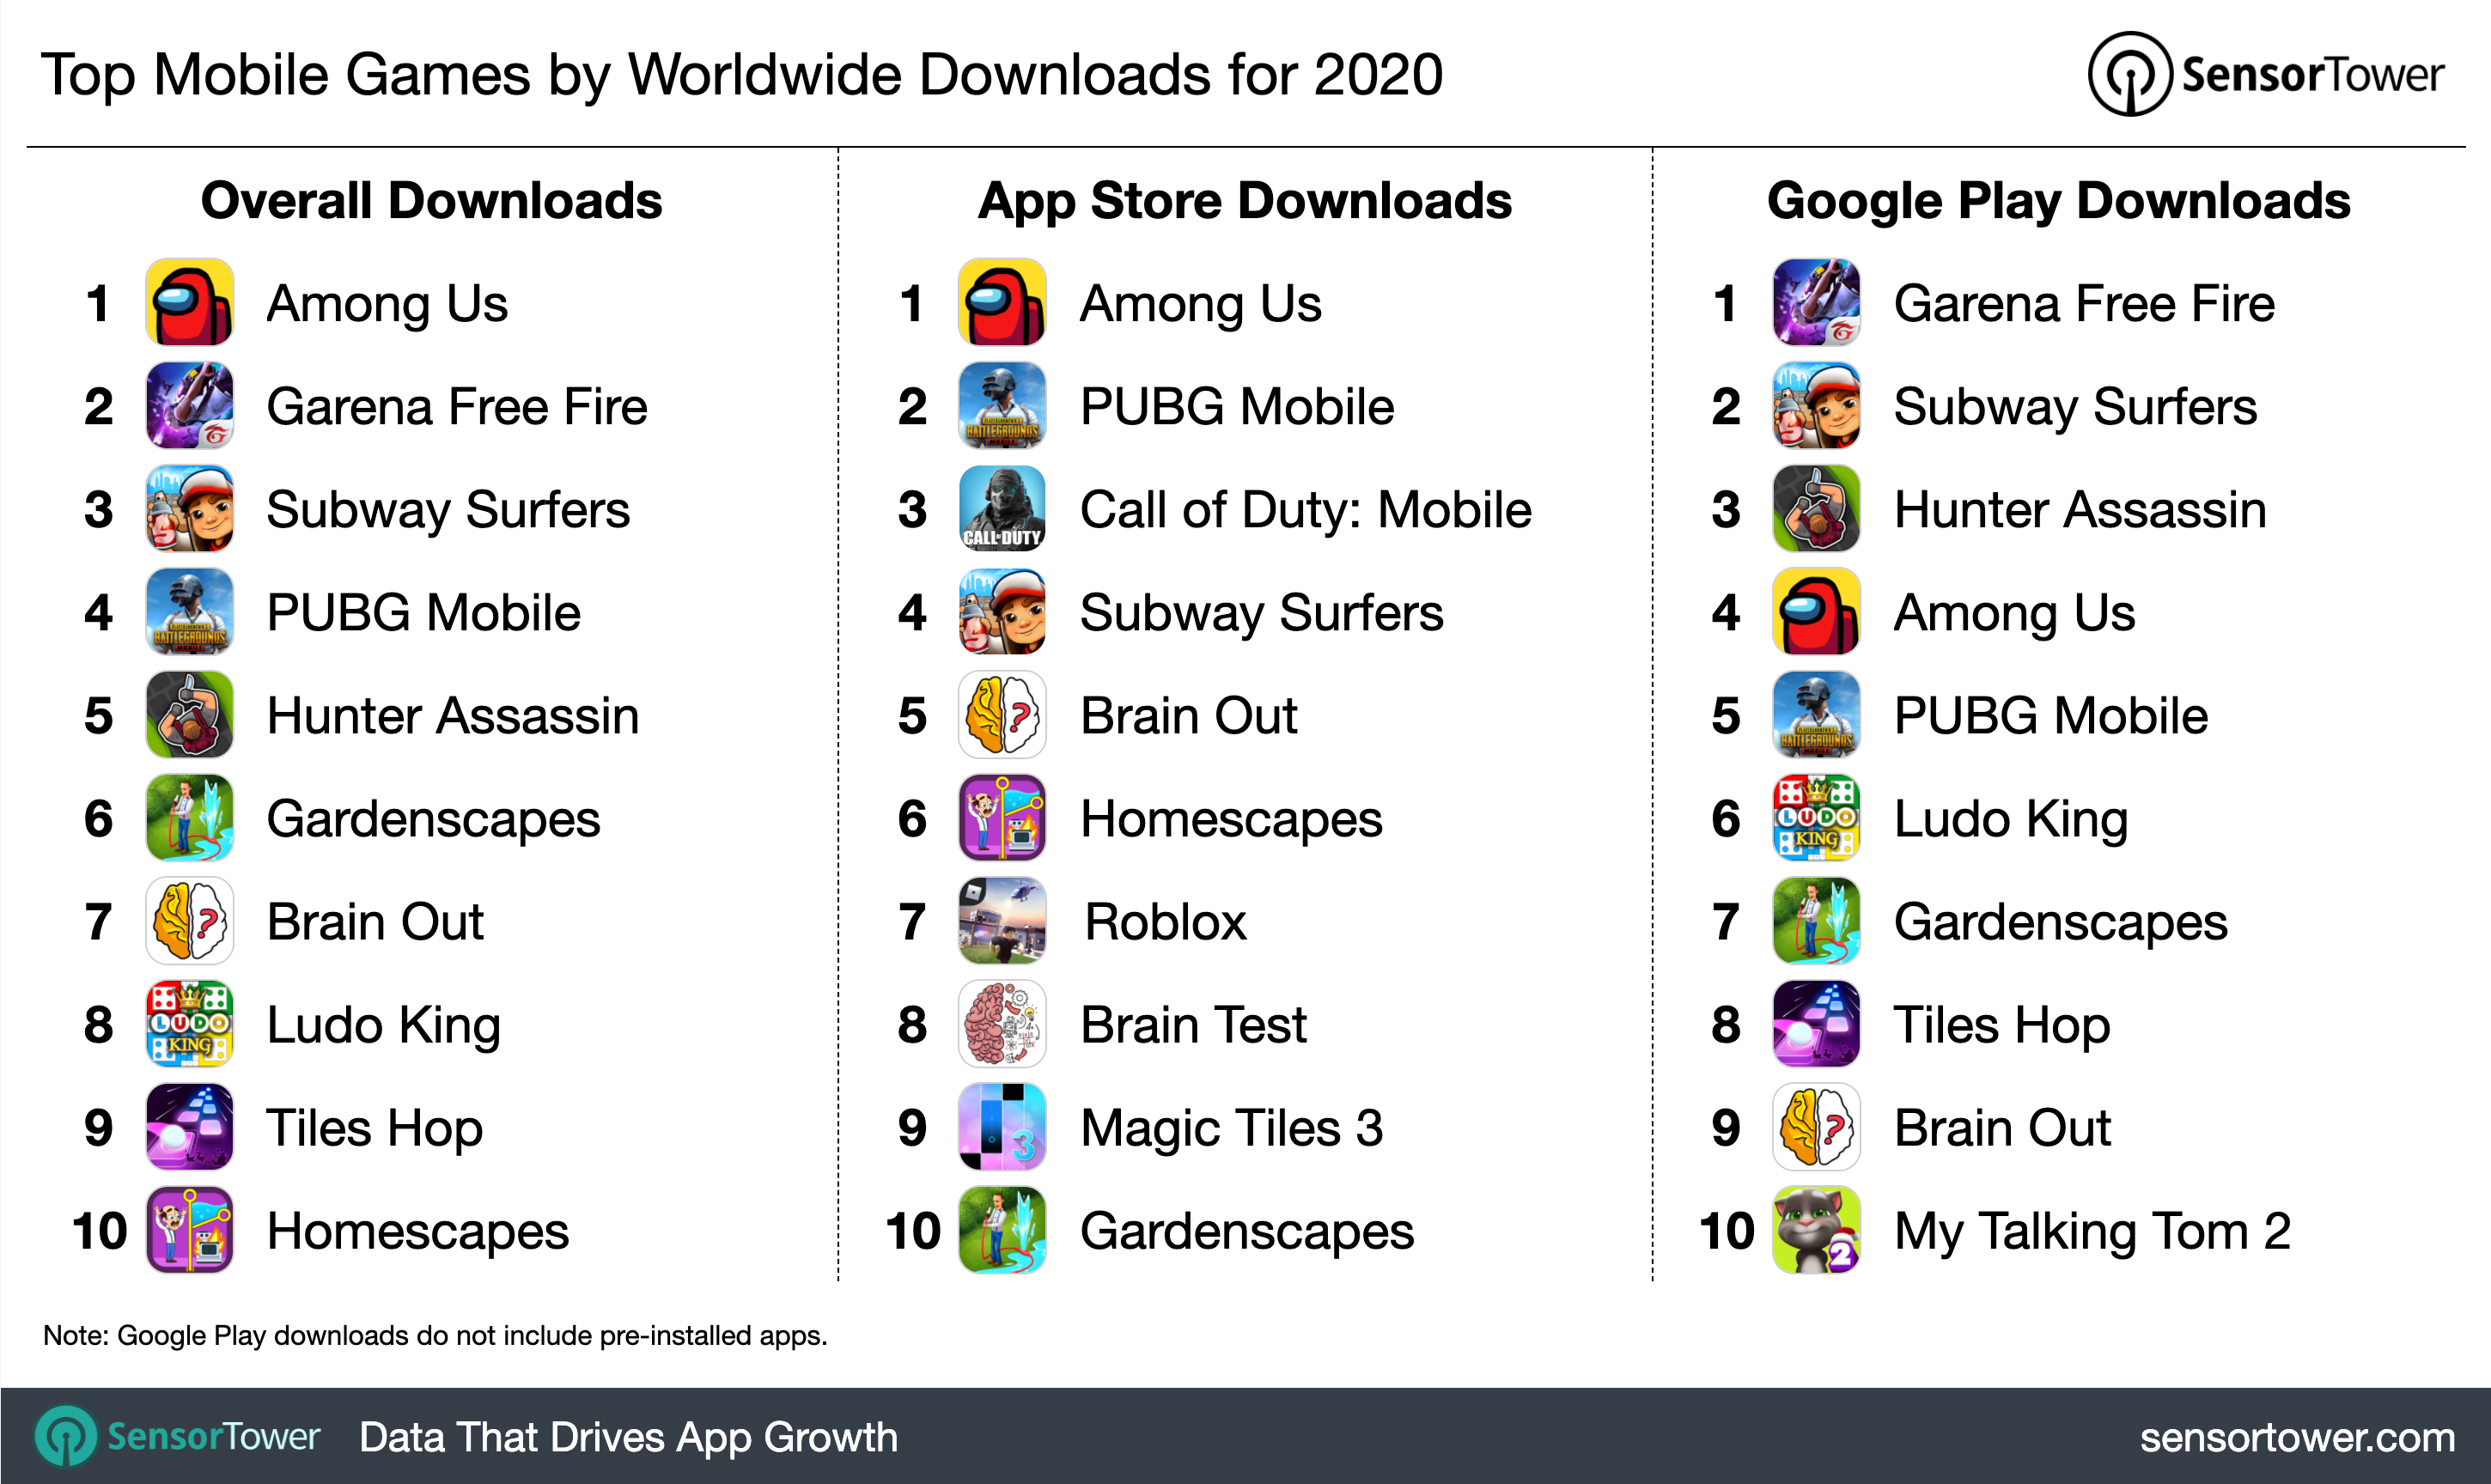 Top Mobile Games Worldwide for May 2020 by Downloads